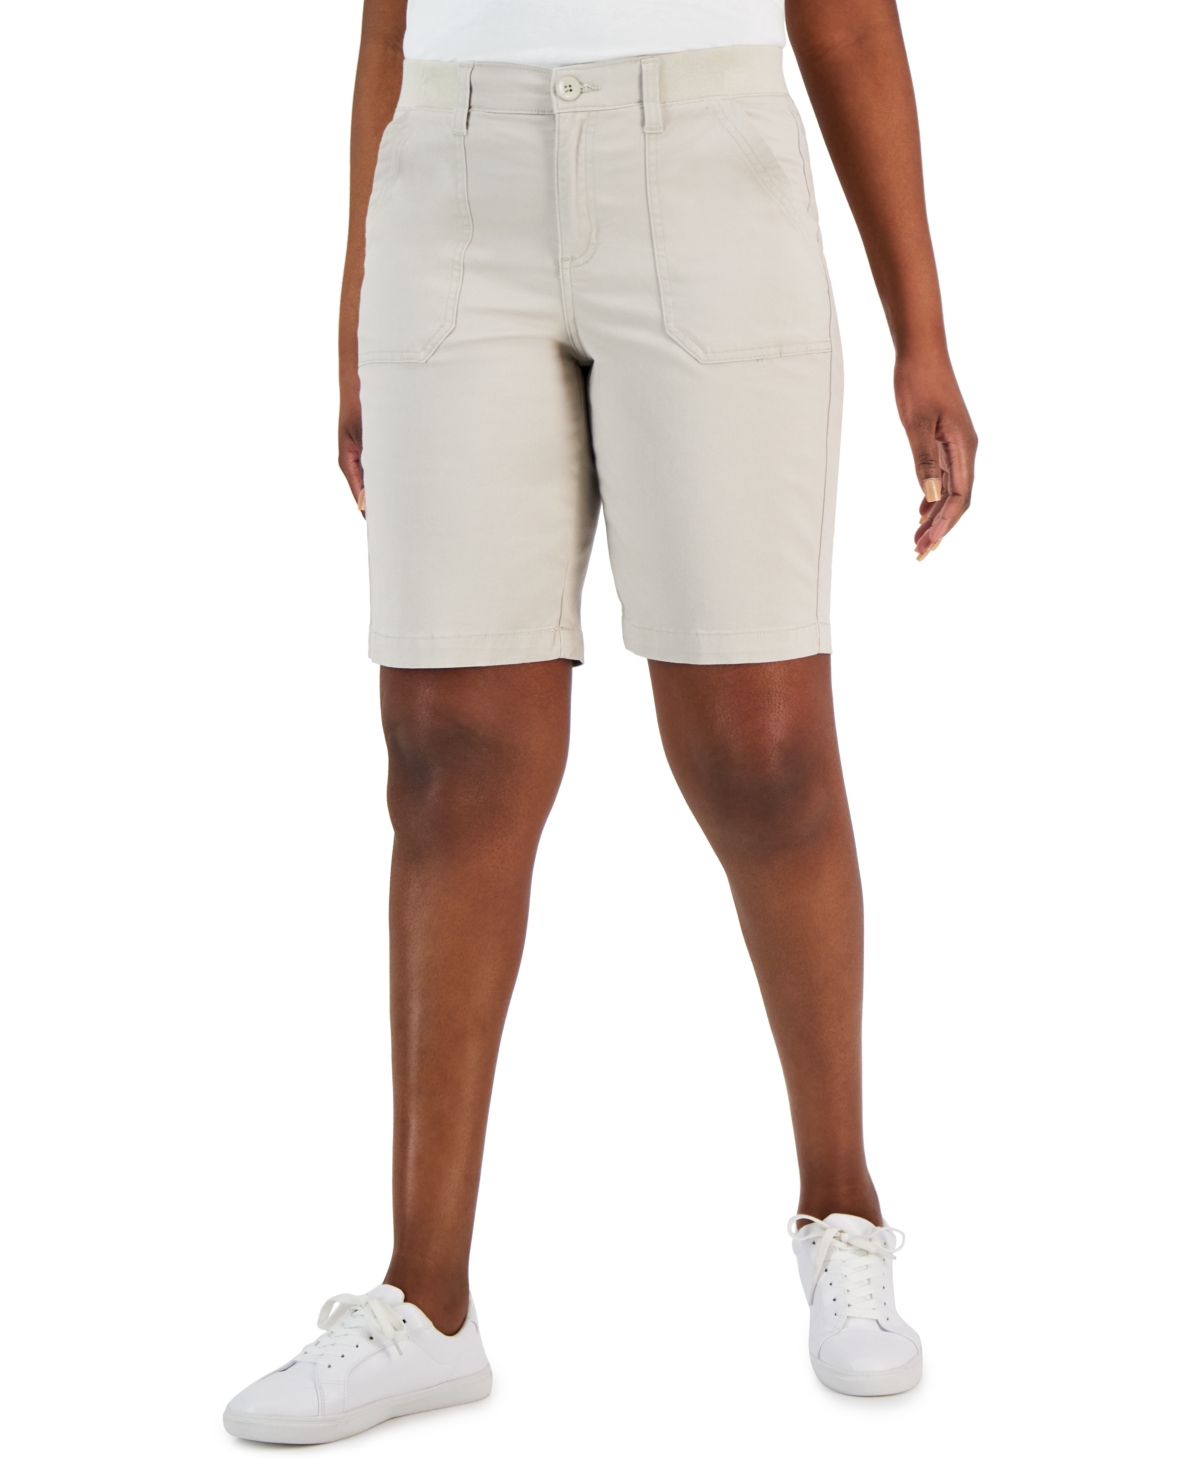 Women's Mid Rise Stretch-Waist Shorts, Created for Macy's - Intrepid Blue